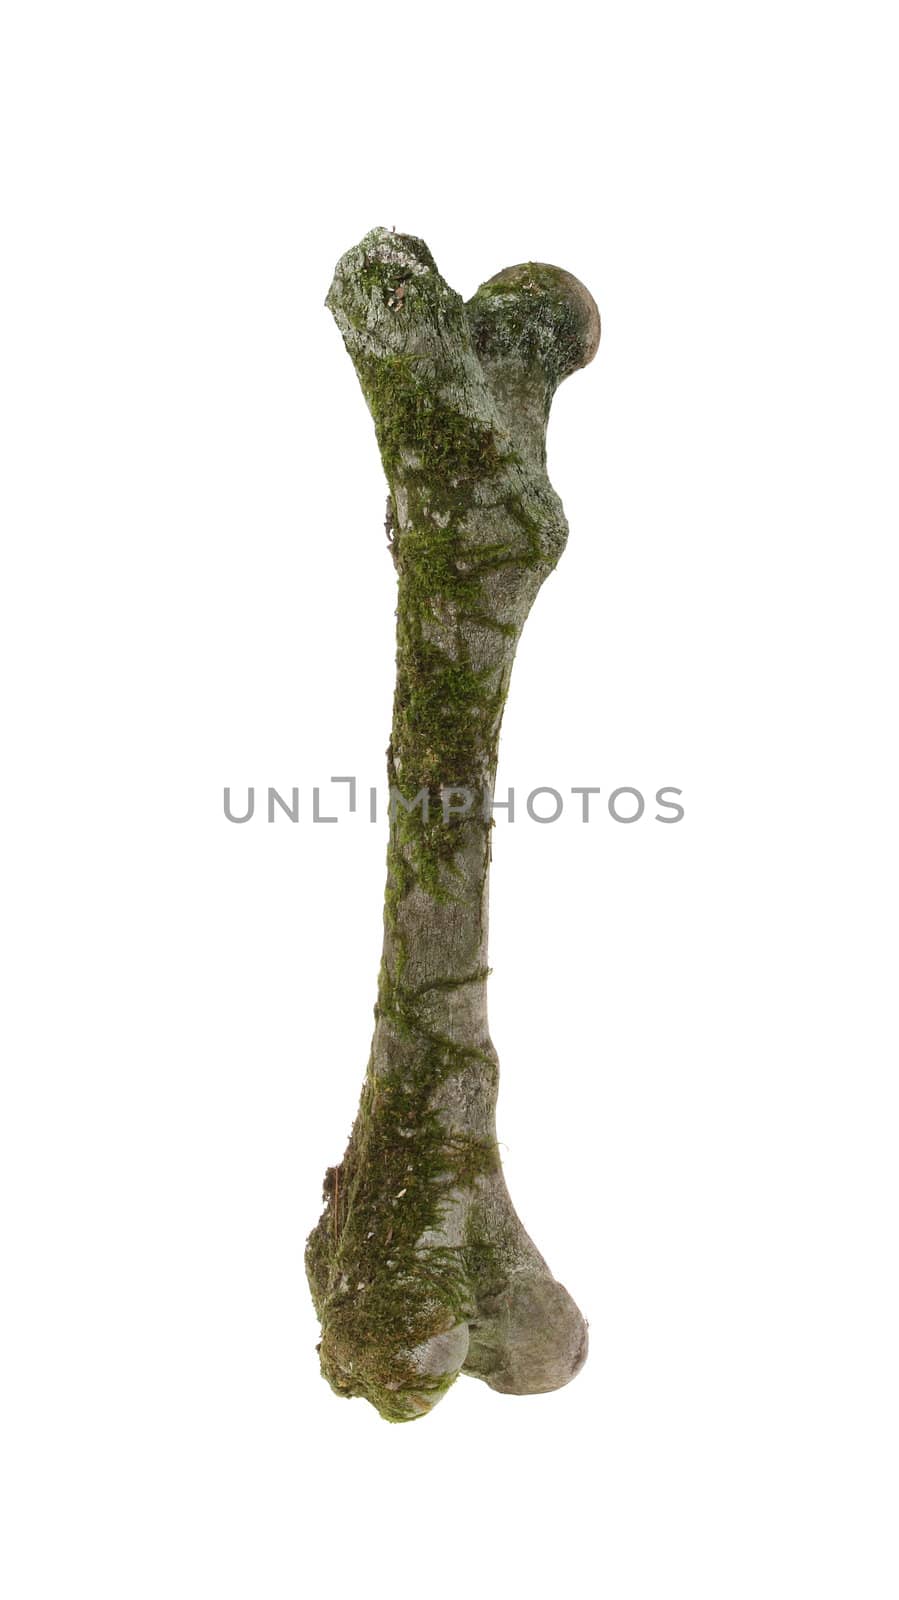 Old Femur roe in the moss on the white background (Capreolus capreolus)
